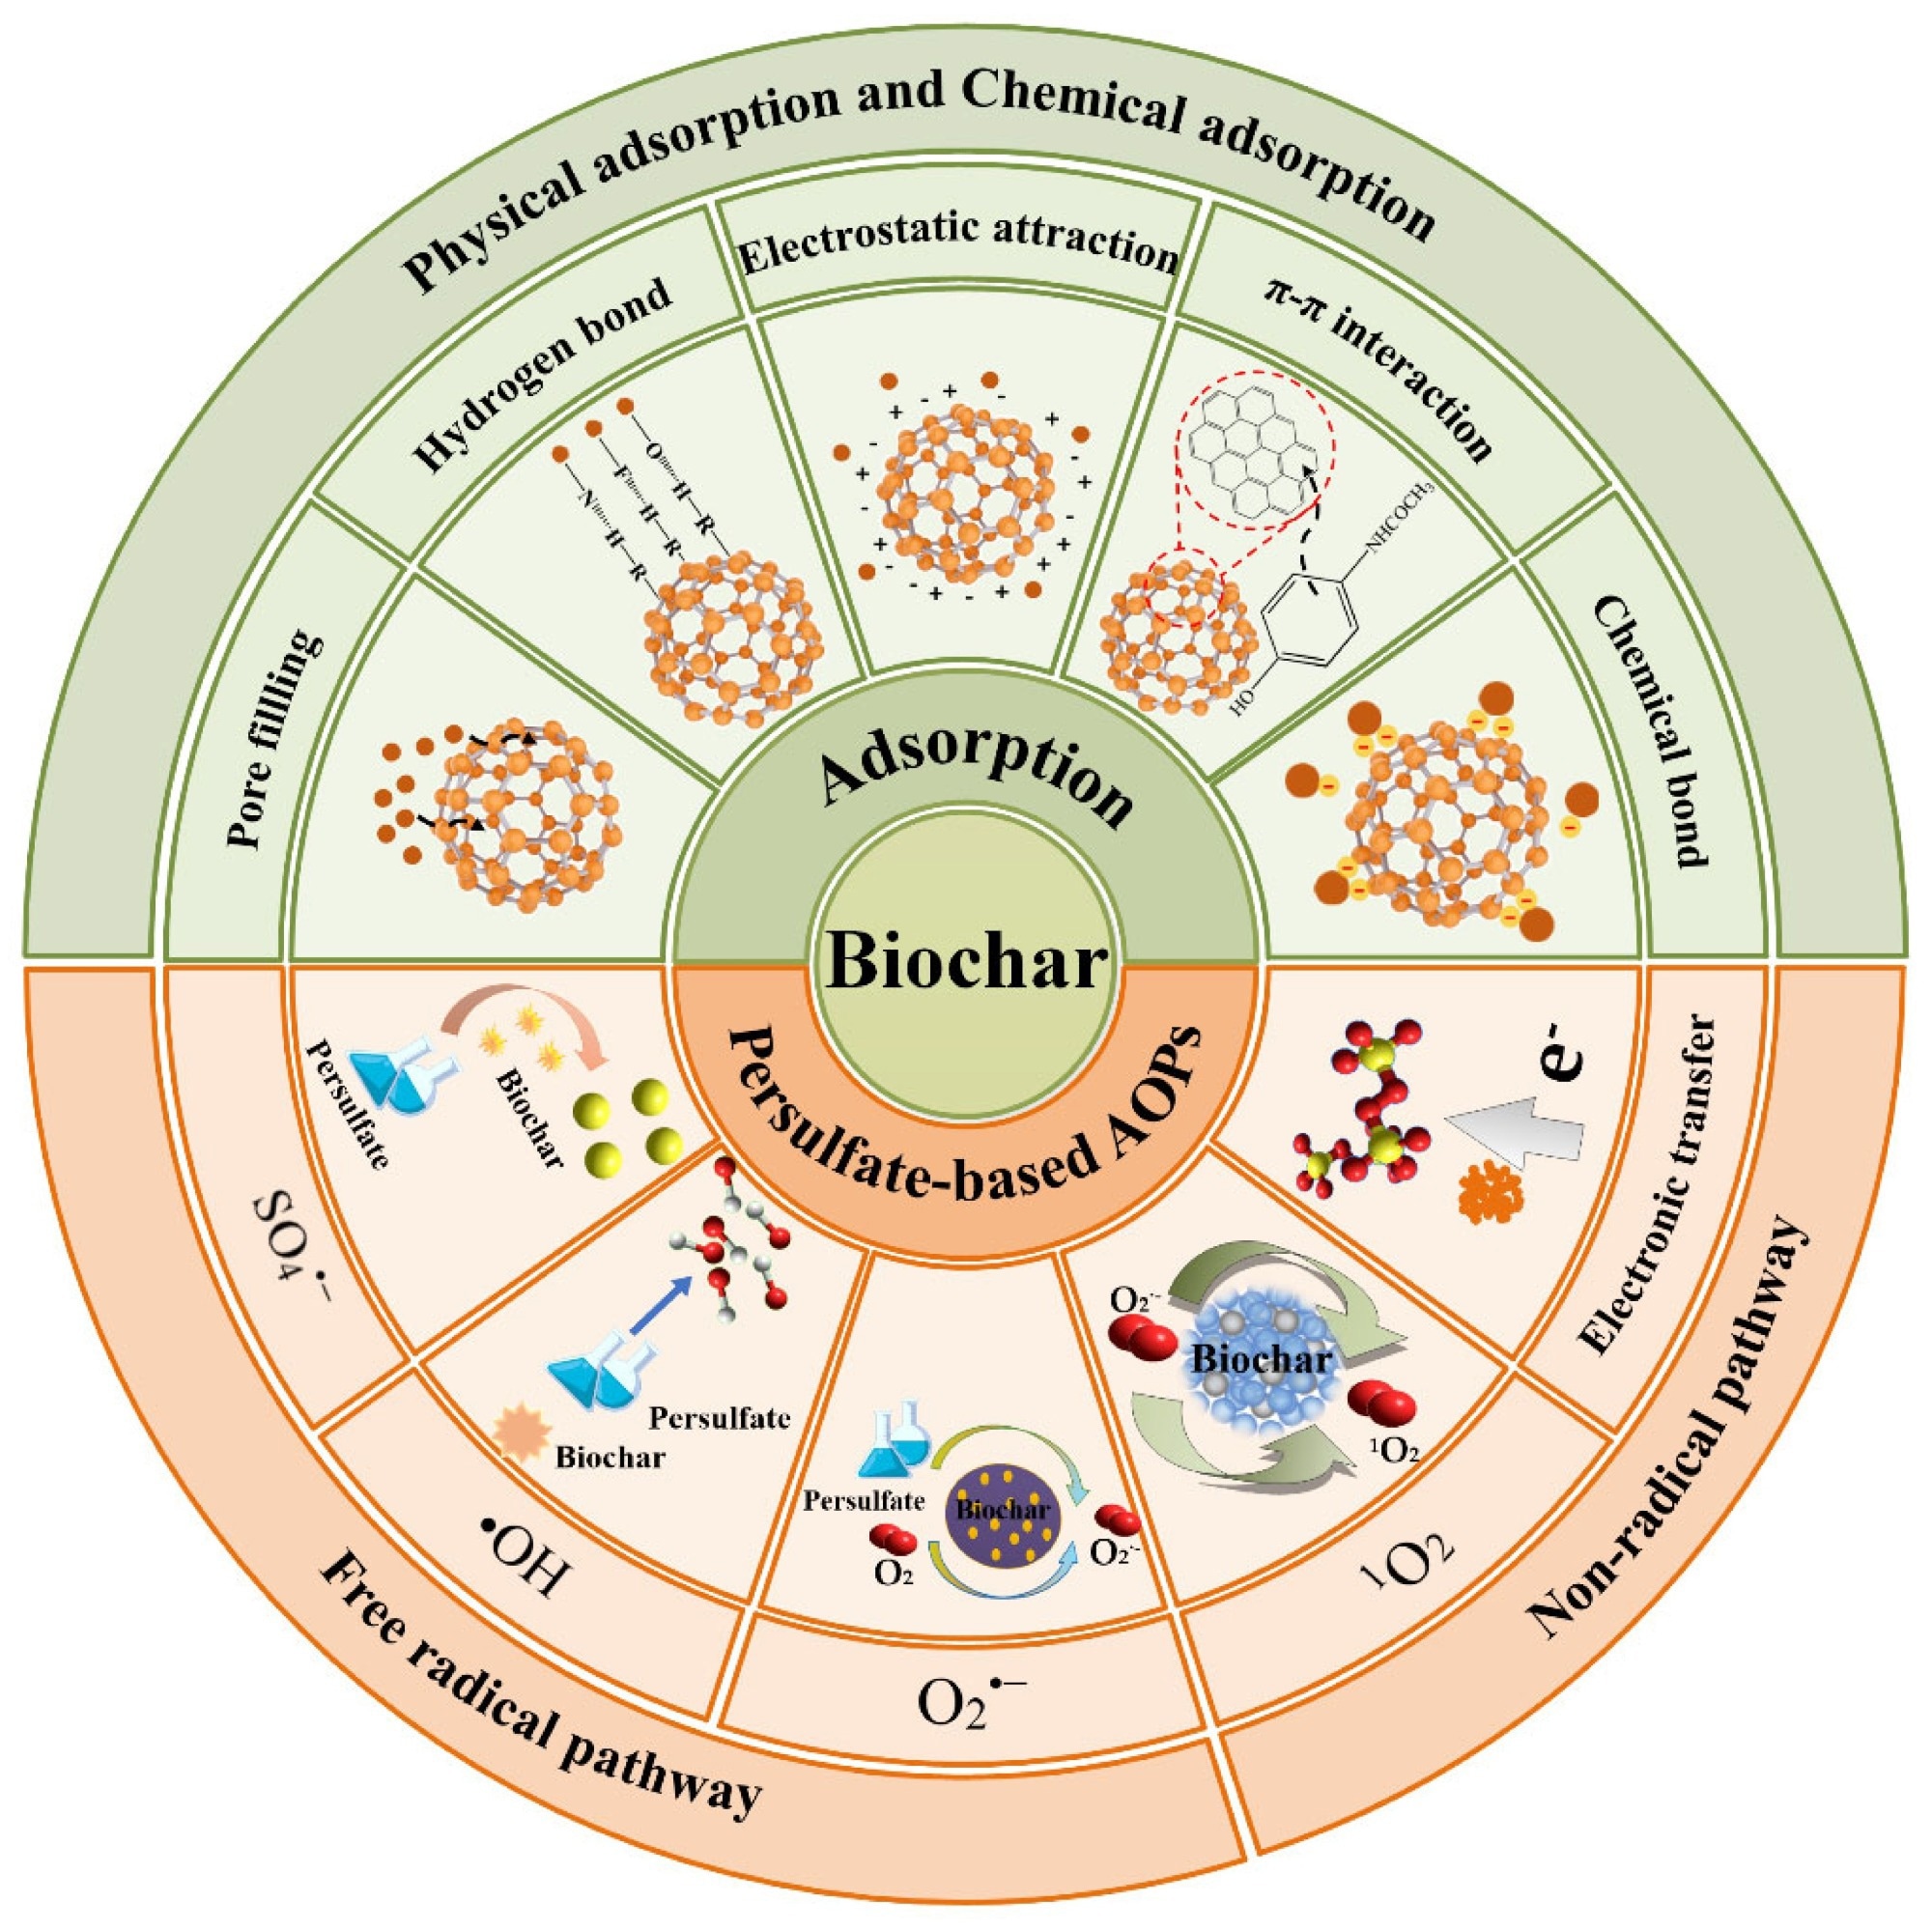 Removal mechanisms and main interactions of pharmaceutical pollutants by biochar.